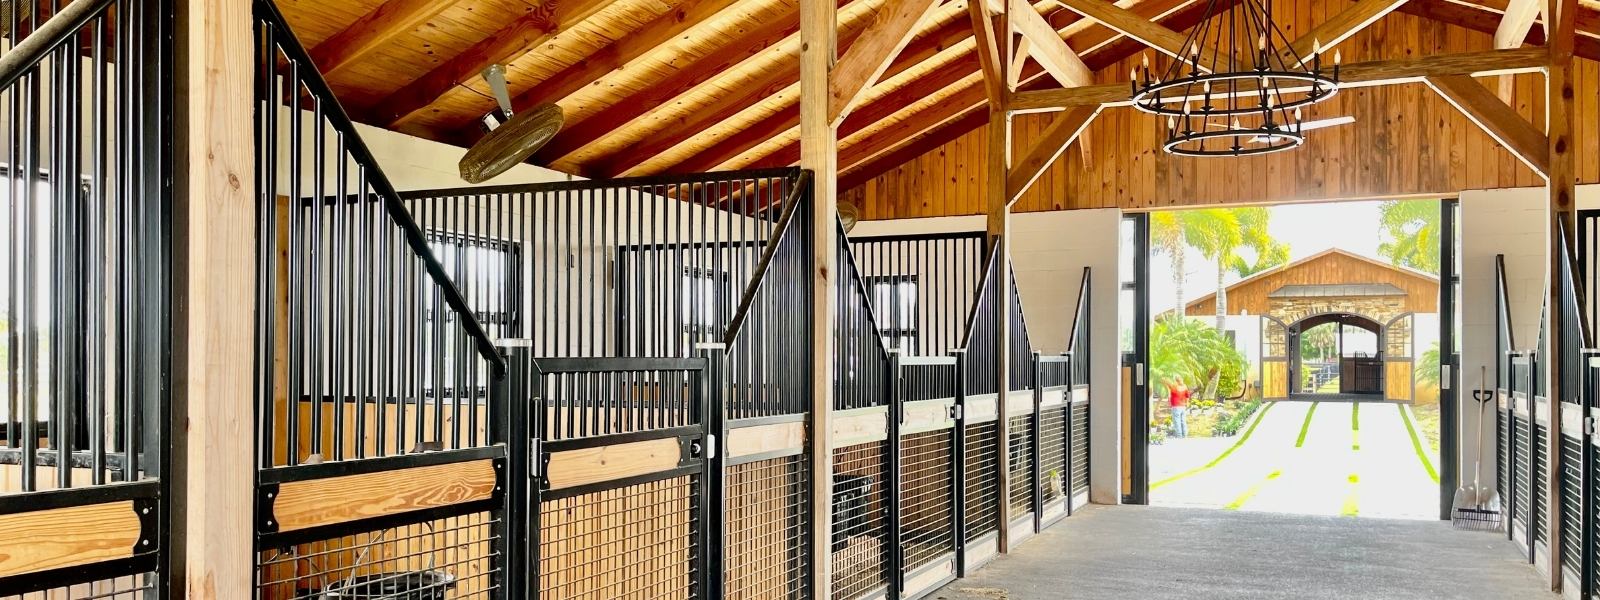 European horse stall fronts